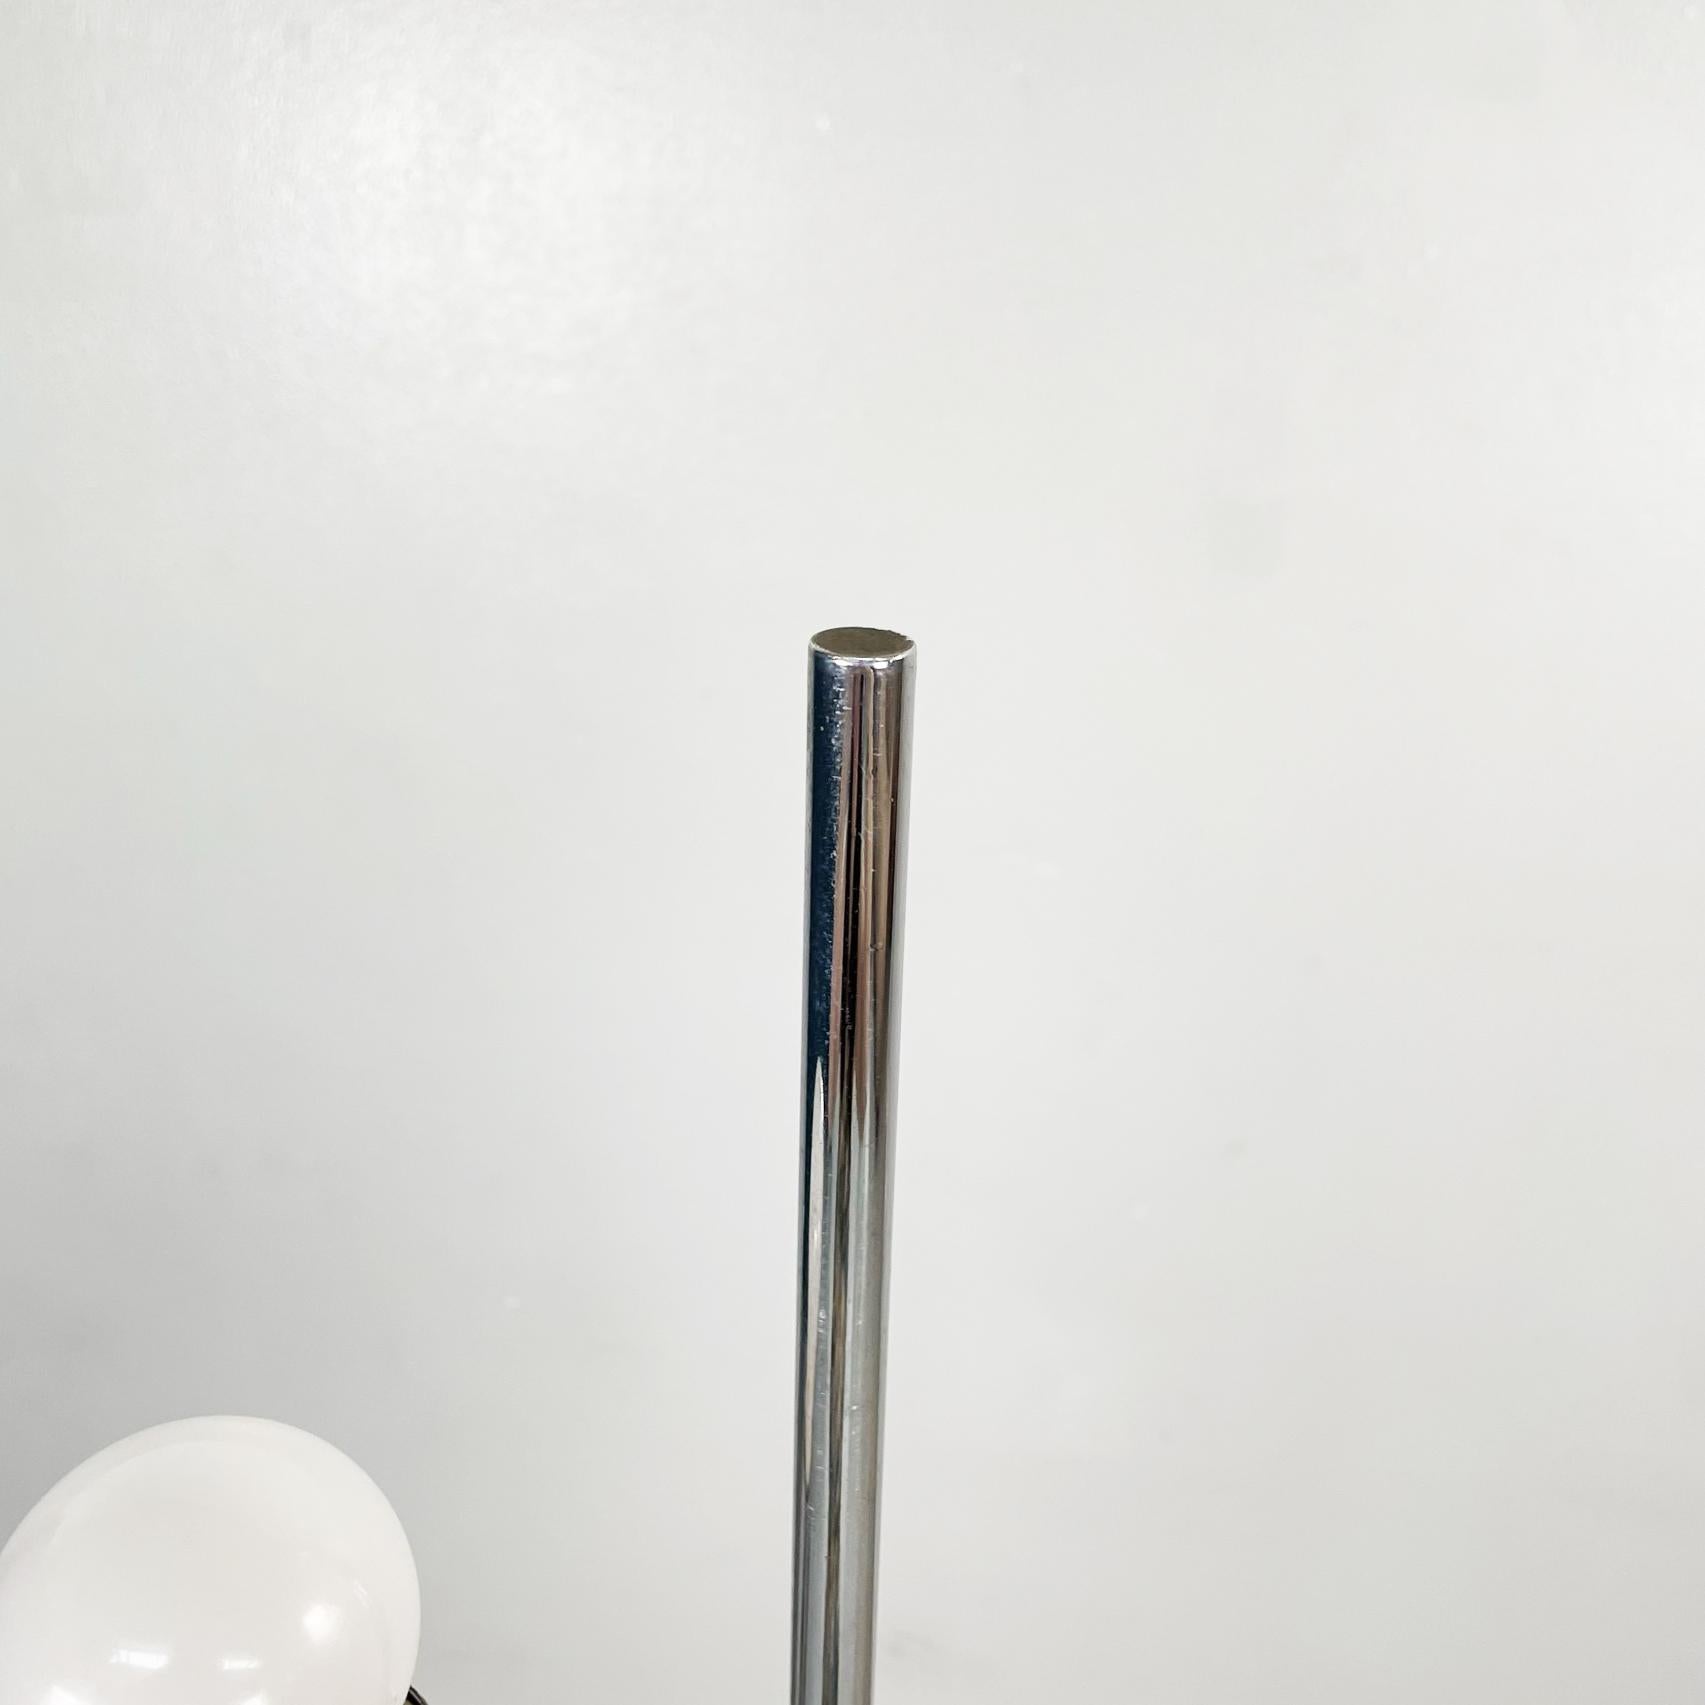 Late 20th Century Italian Space Age Floor Lamp in Chromed Metal, 1970s For Sale